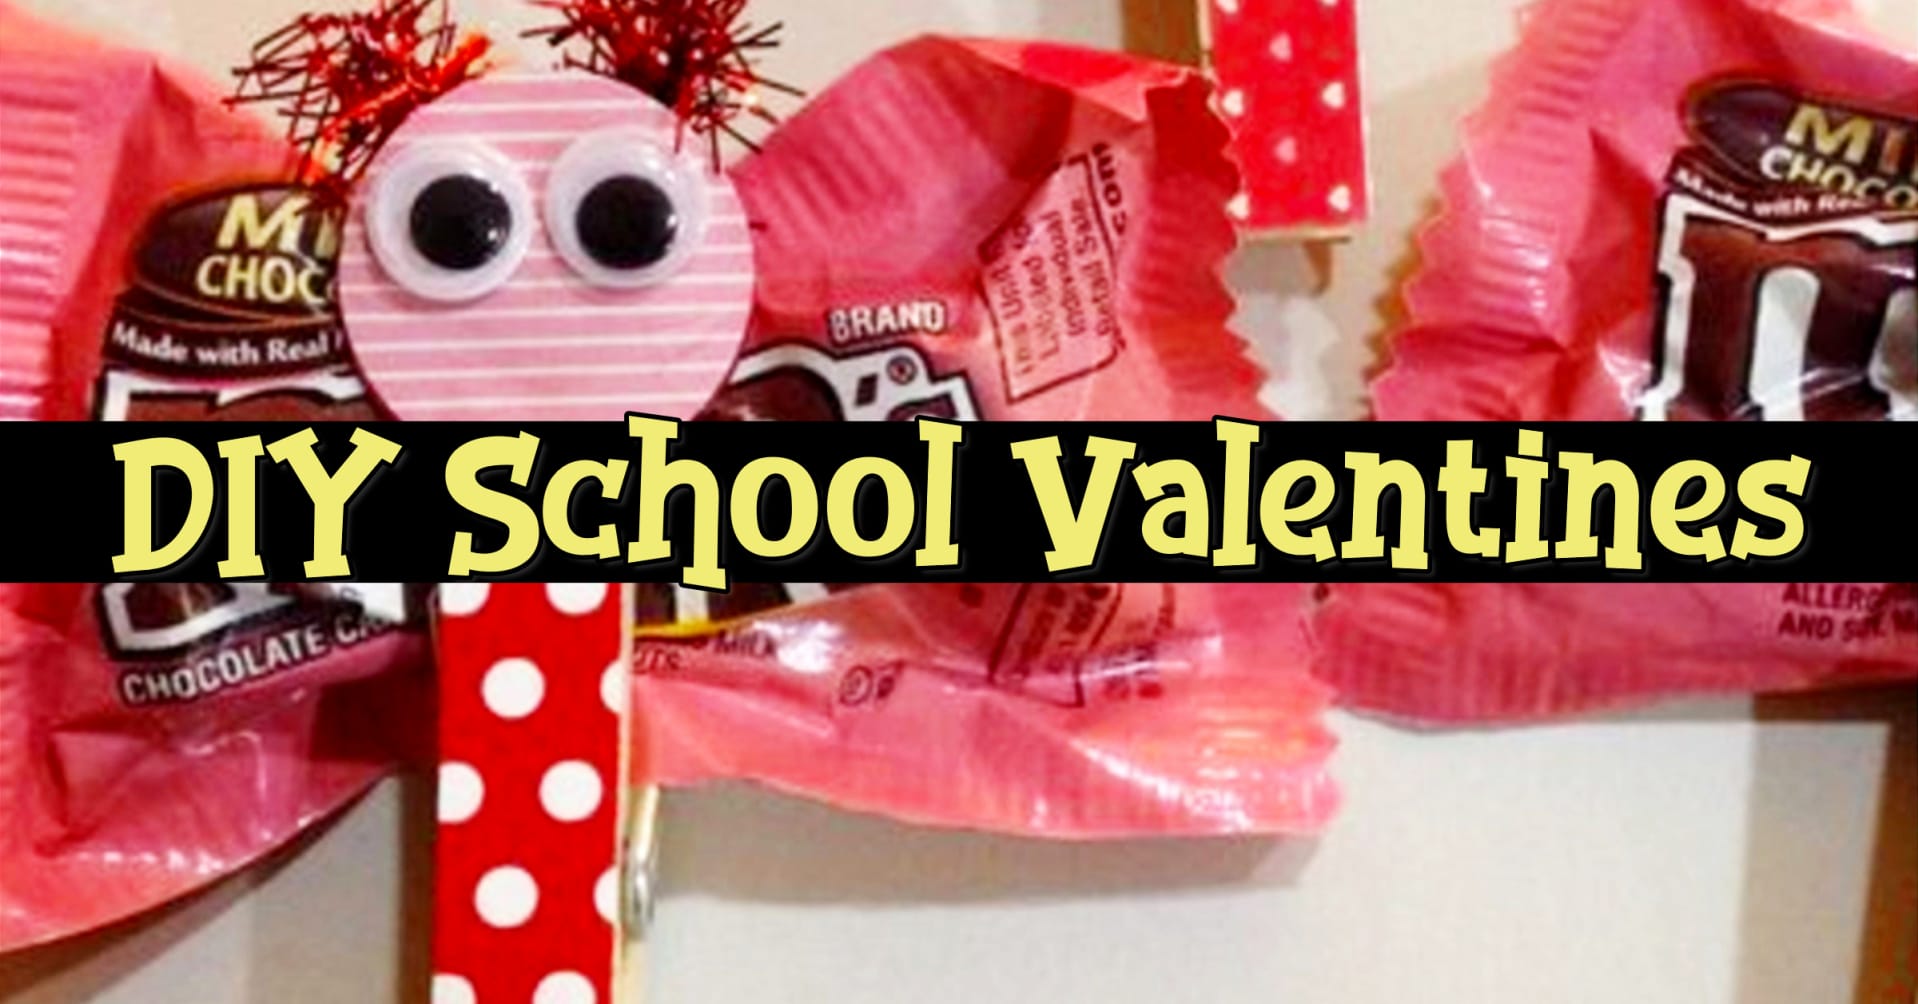 DIY school valentines for the classroom and for teachers - cute ideas for classmates!